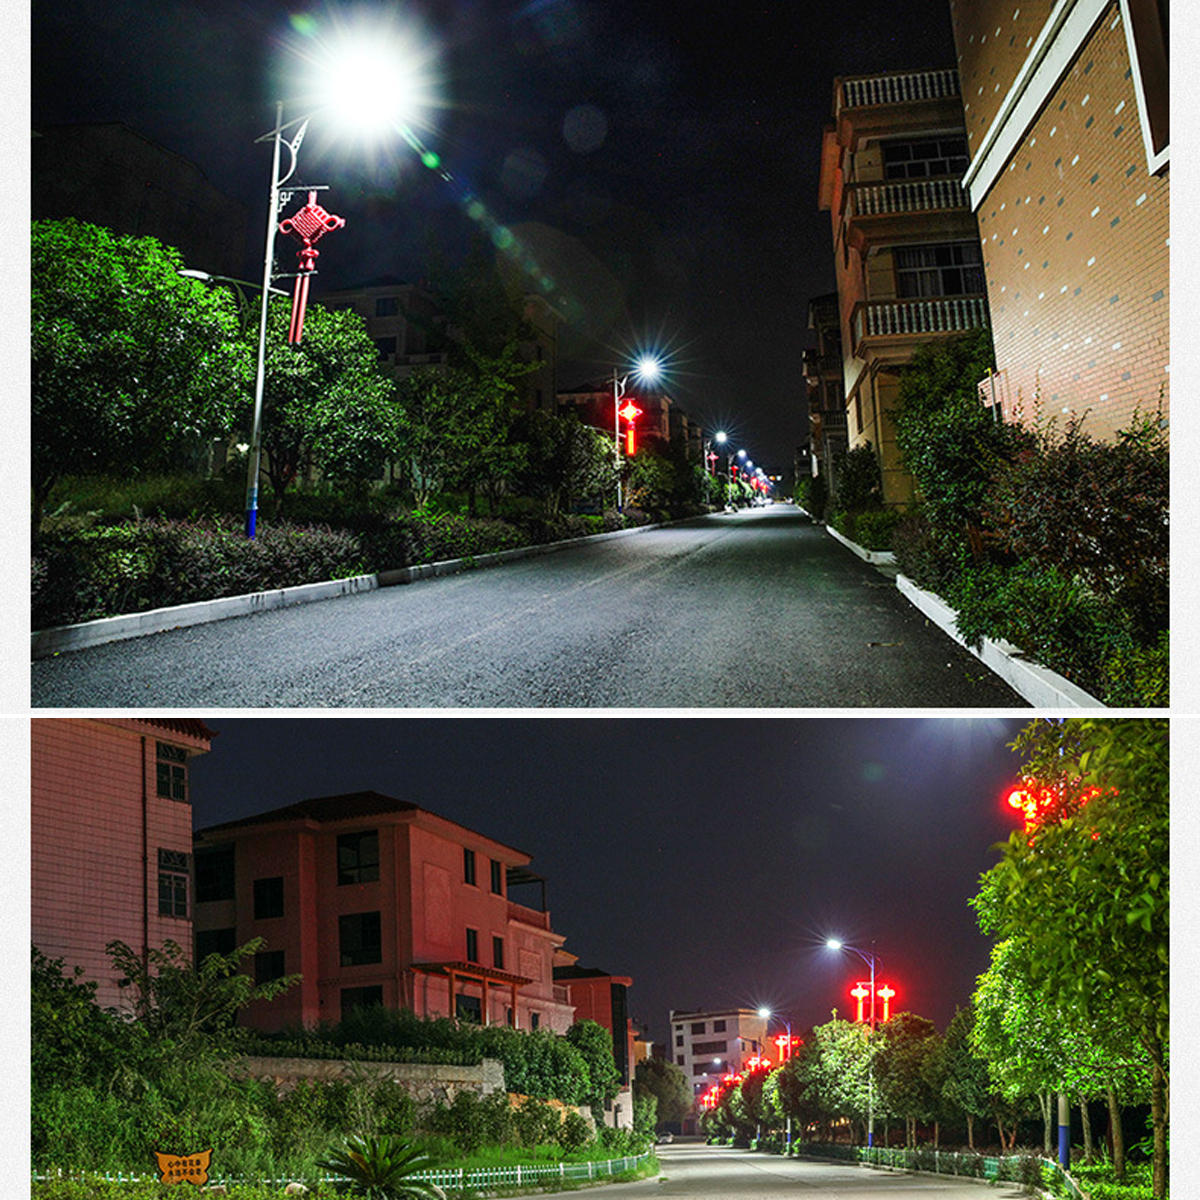 250450800W-Solar-LED-Cool-White-Street-Light-Waterproof-Outdoor-Lamp-w-Remote-1758789-3